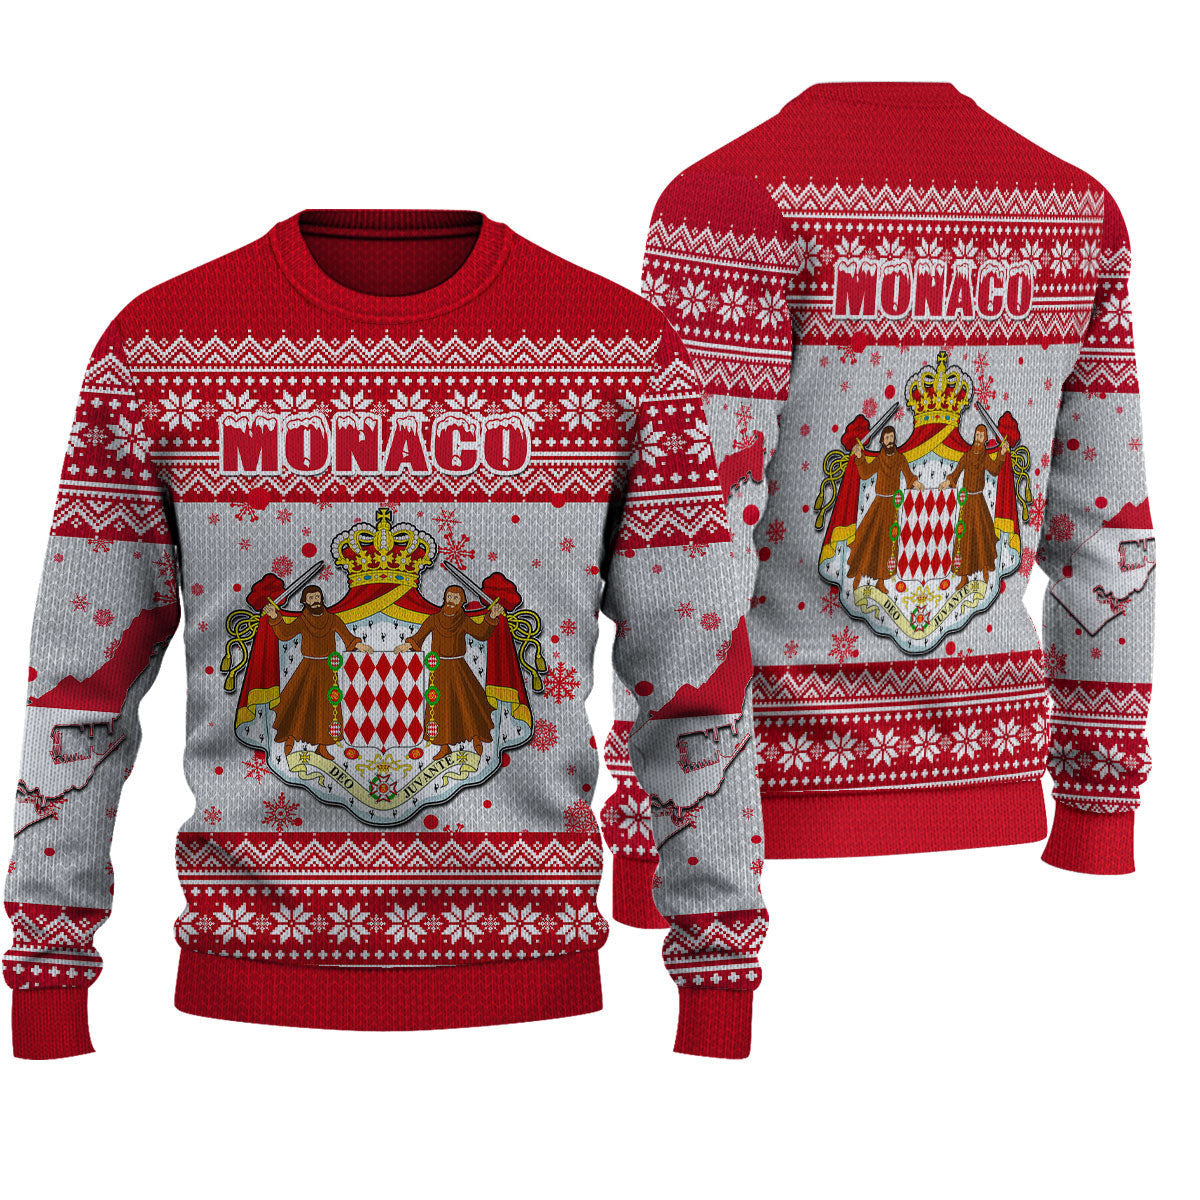 wonder-print-shop-ugly-sweater-monaco-christmas-knitted-sweater